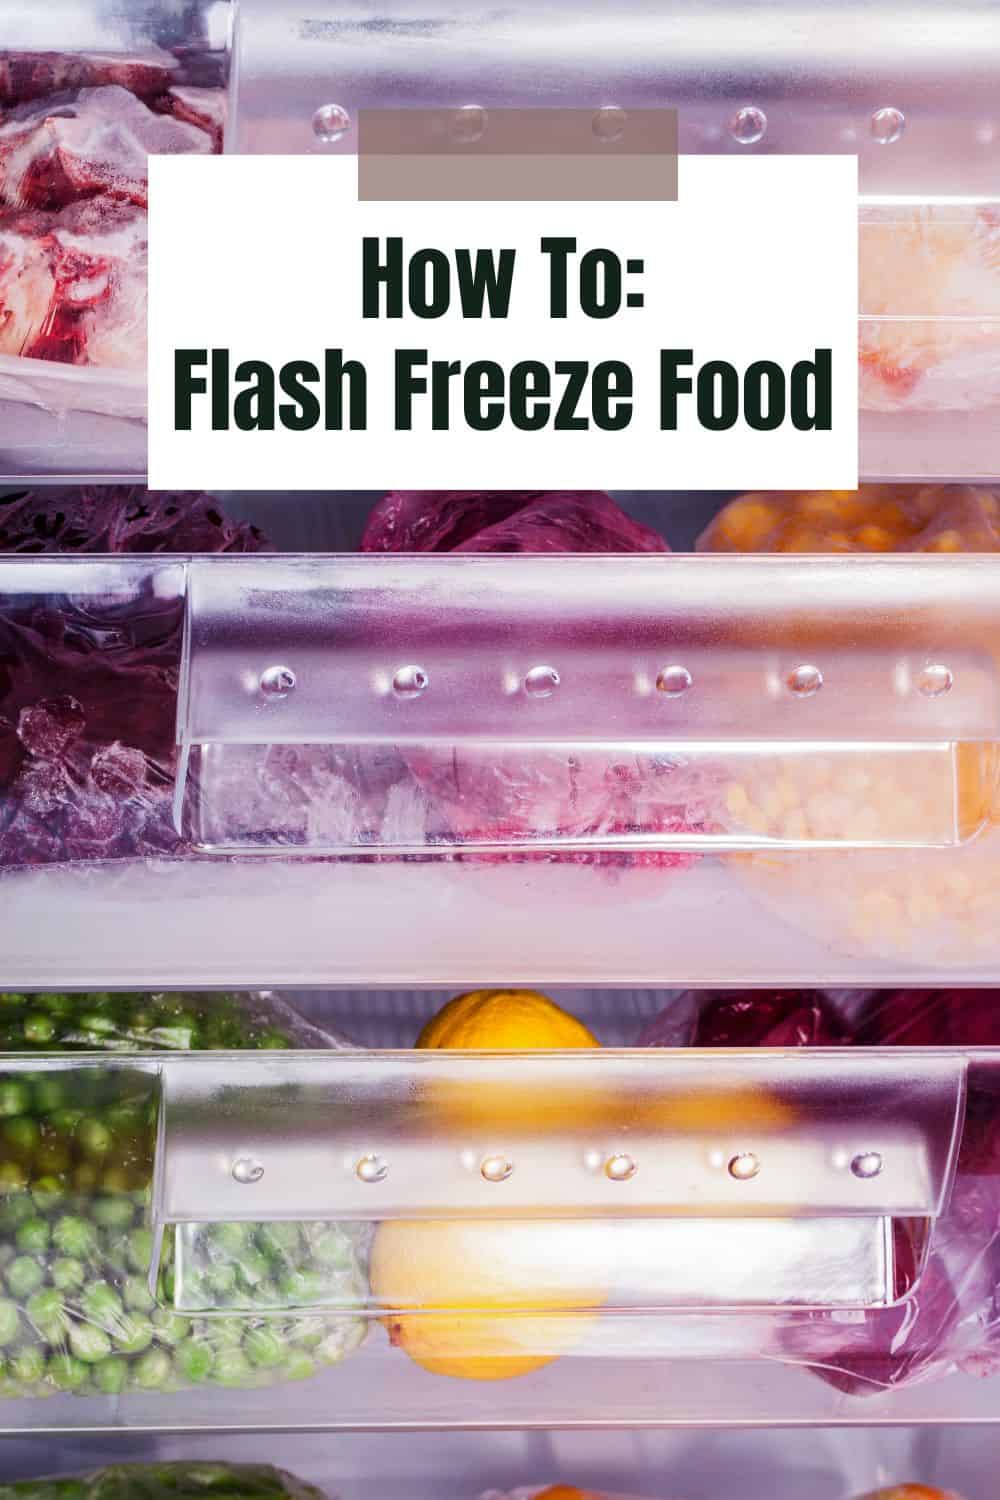 Food shown in clear plastic bags in three freezer drawers with text overlayed that says "How to Flash Freeze Food"